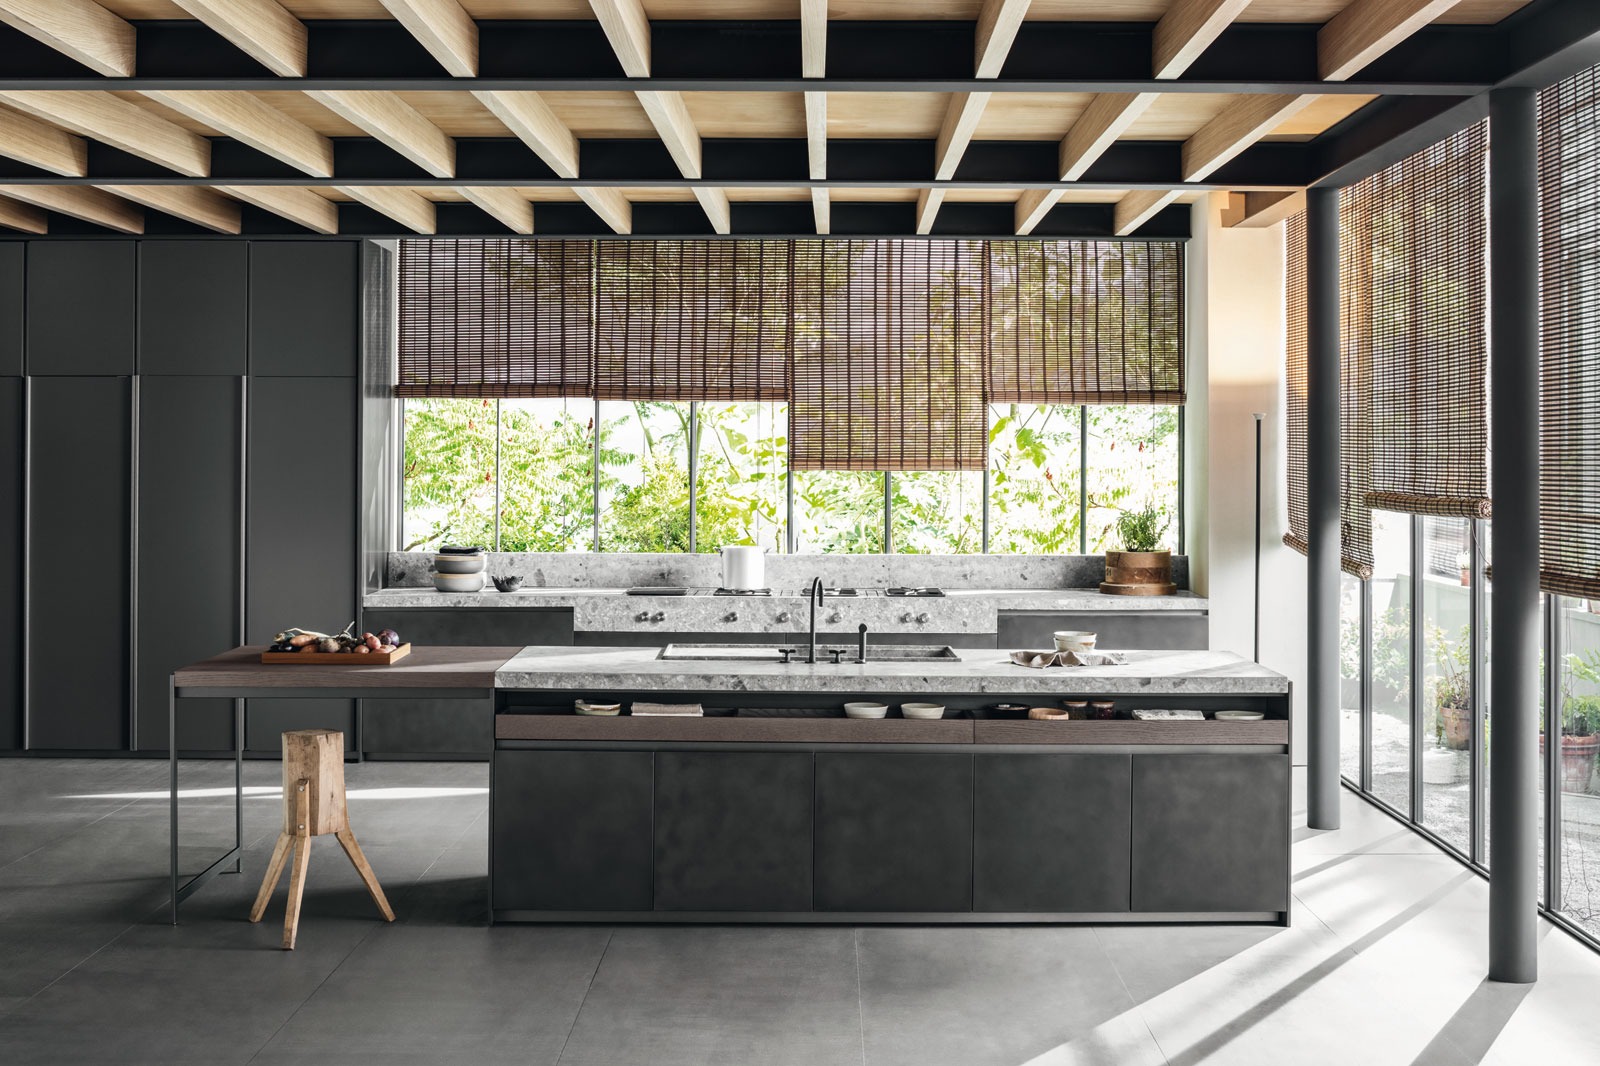 What Features Makes an Italian Kitchen Better Than Others?